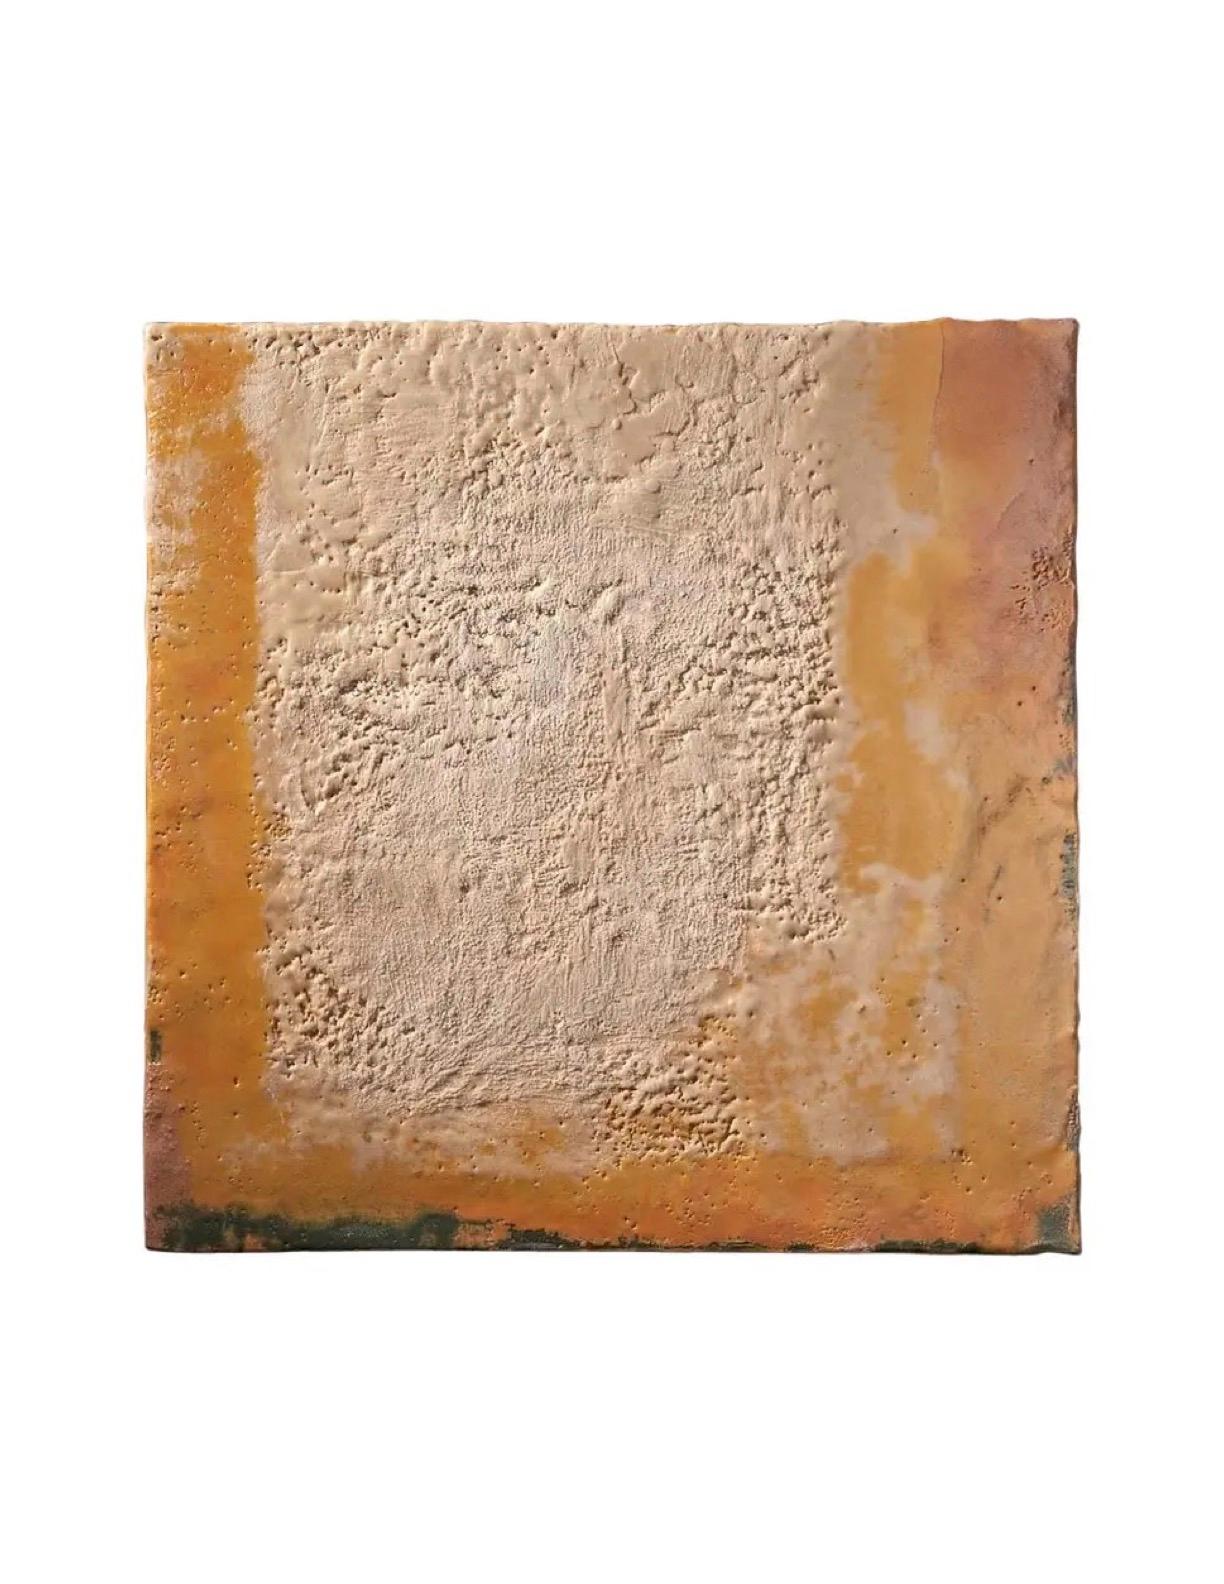 Modern Richard Hirsch Encaustic Painting of Nothing, Painting of Nothing Series, 2012 For Sale